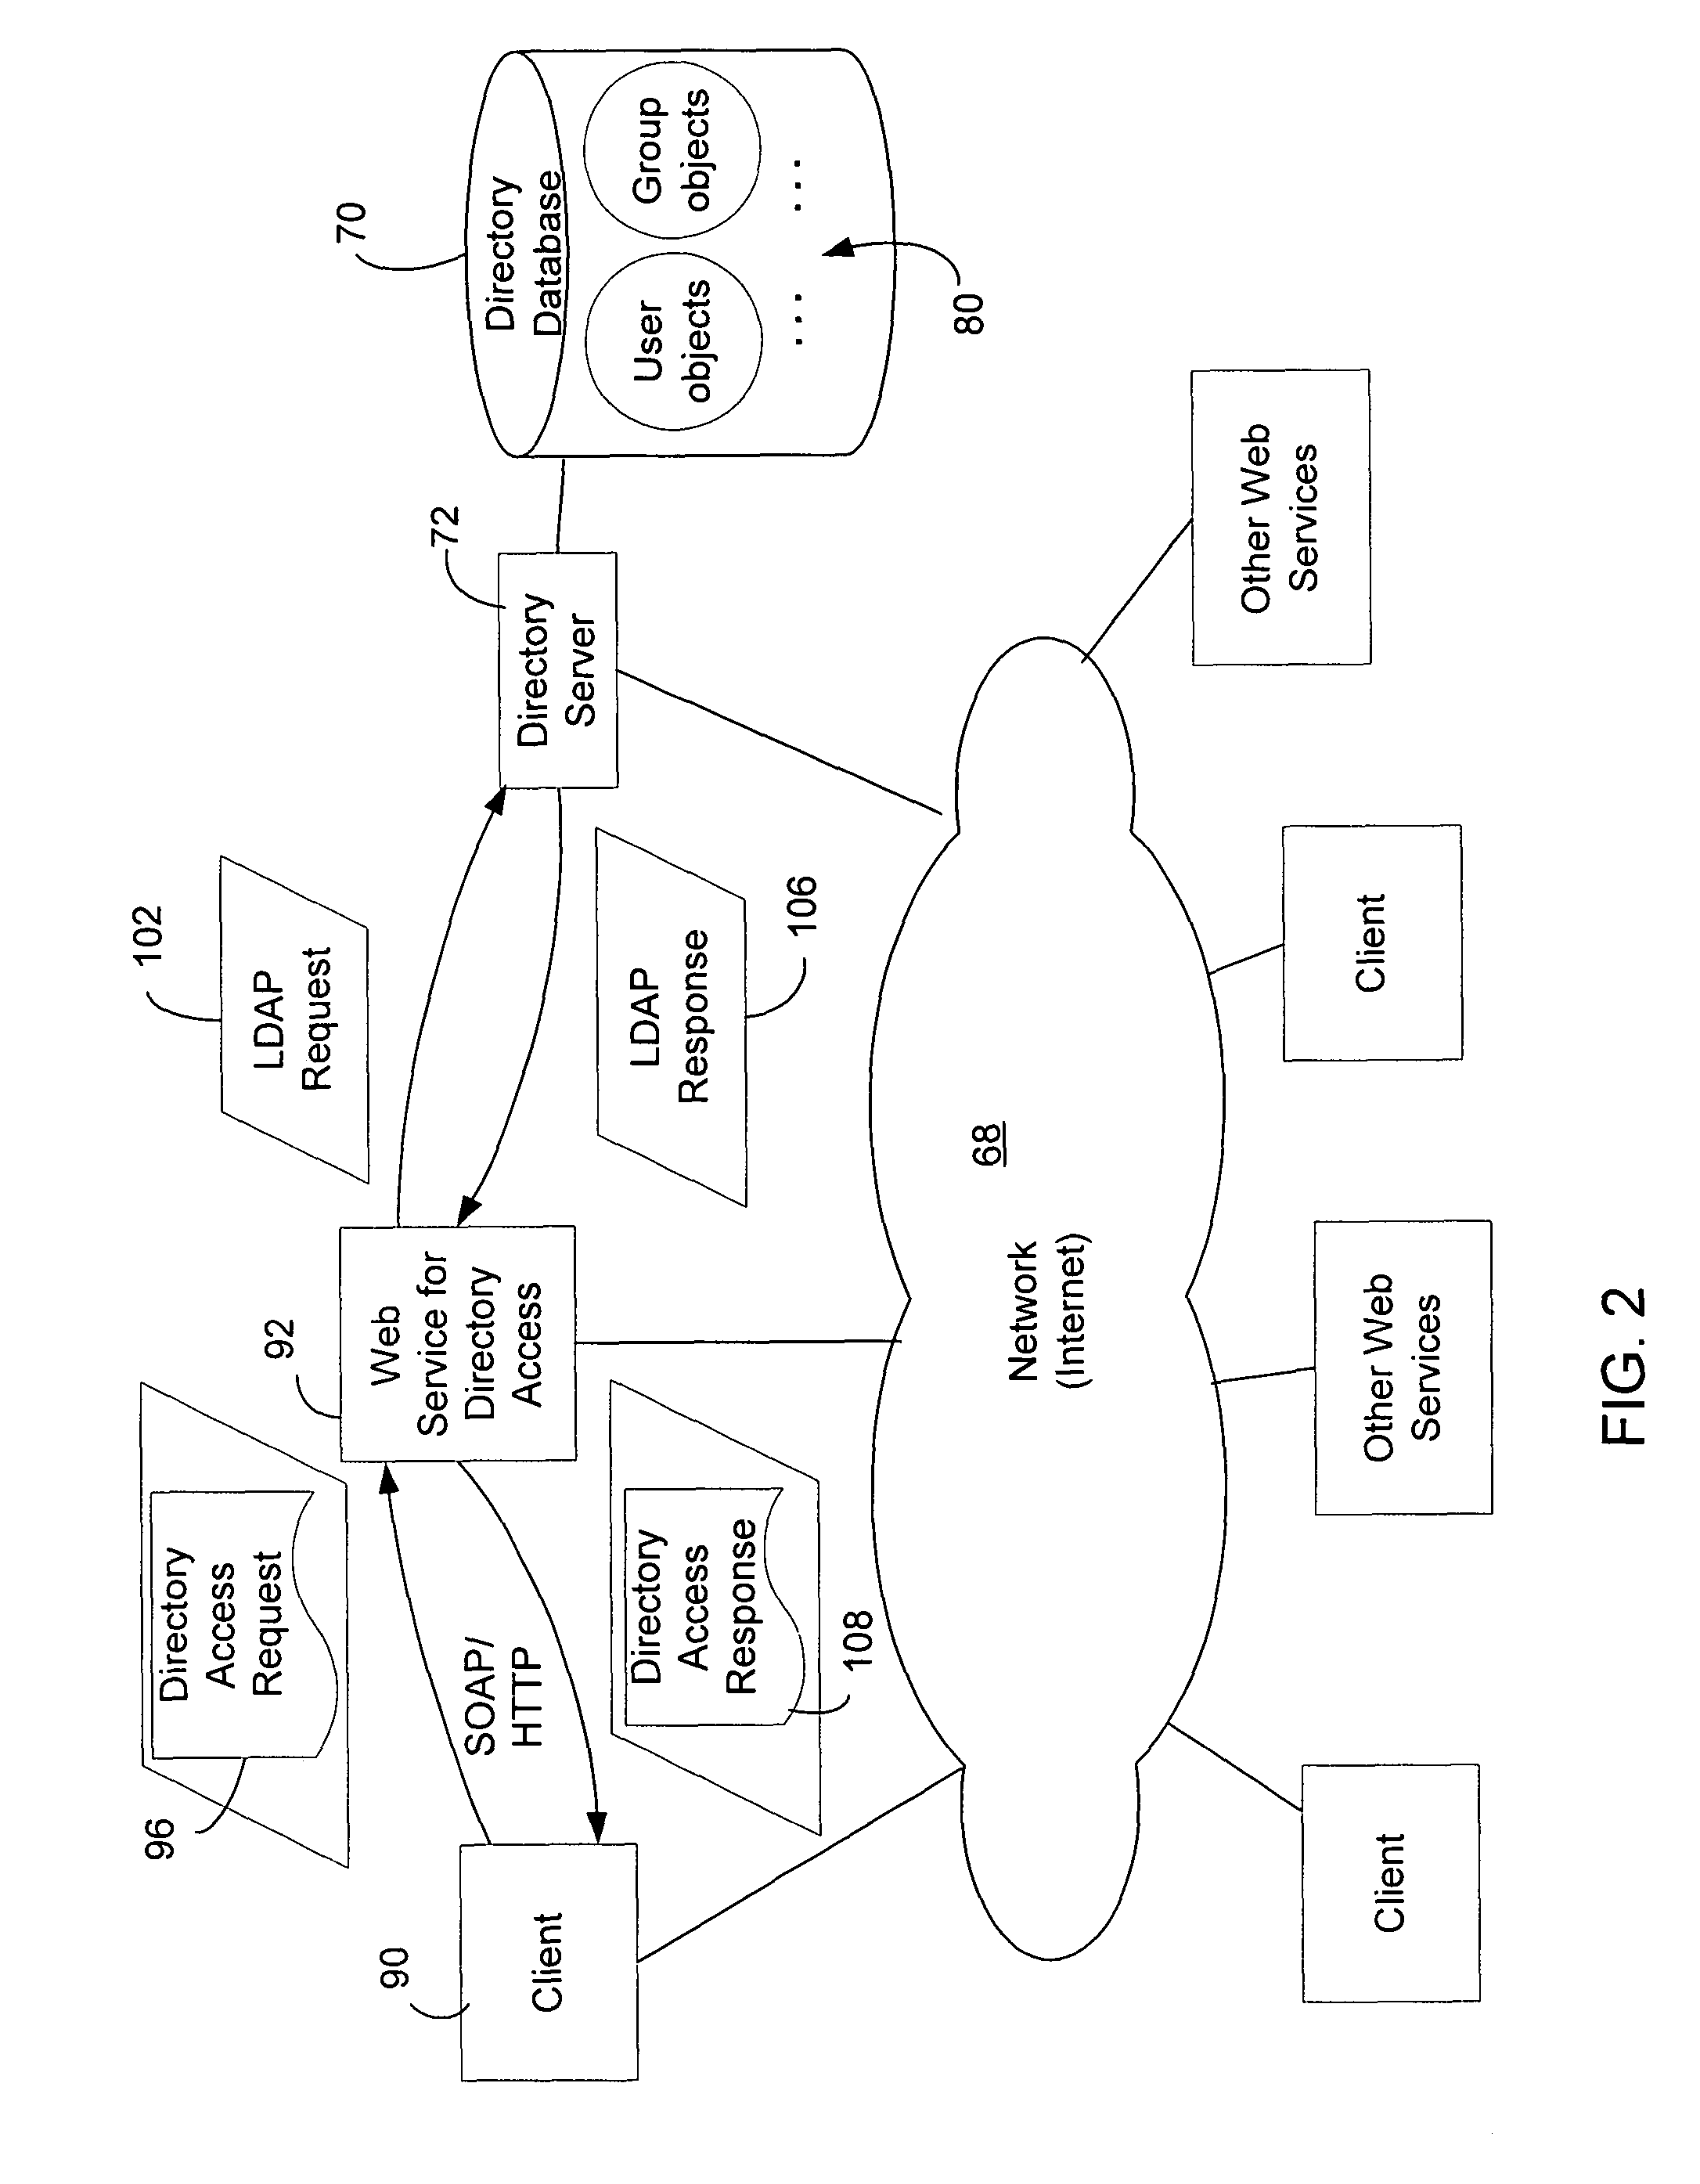 Method and system for accessing a network database as a web service